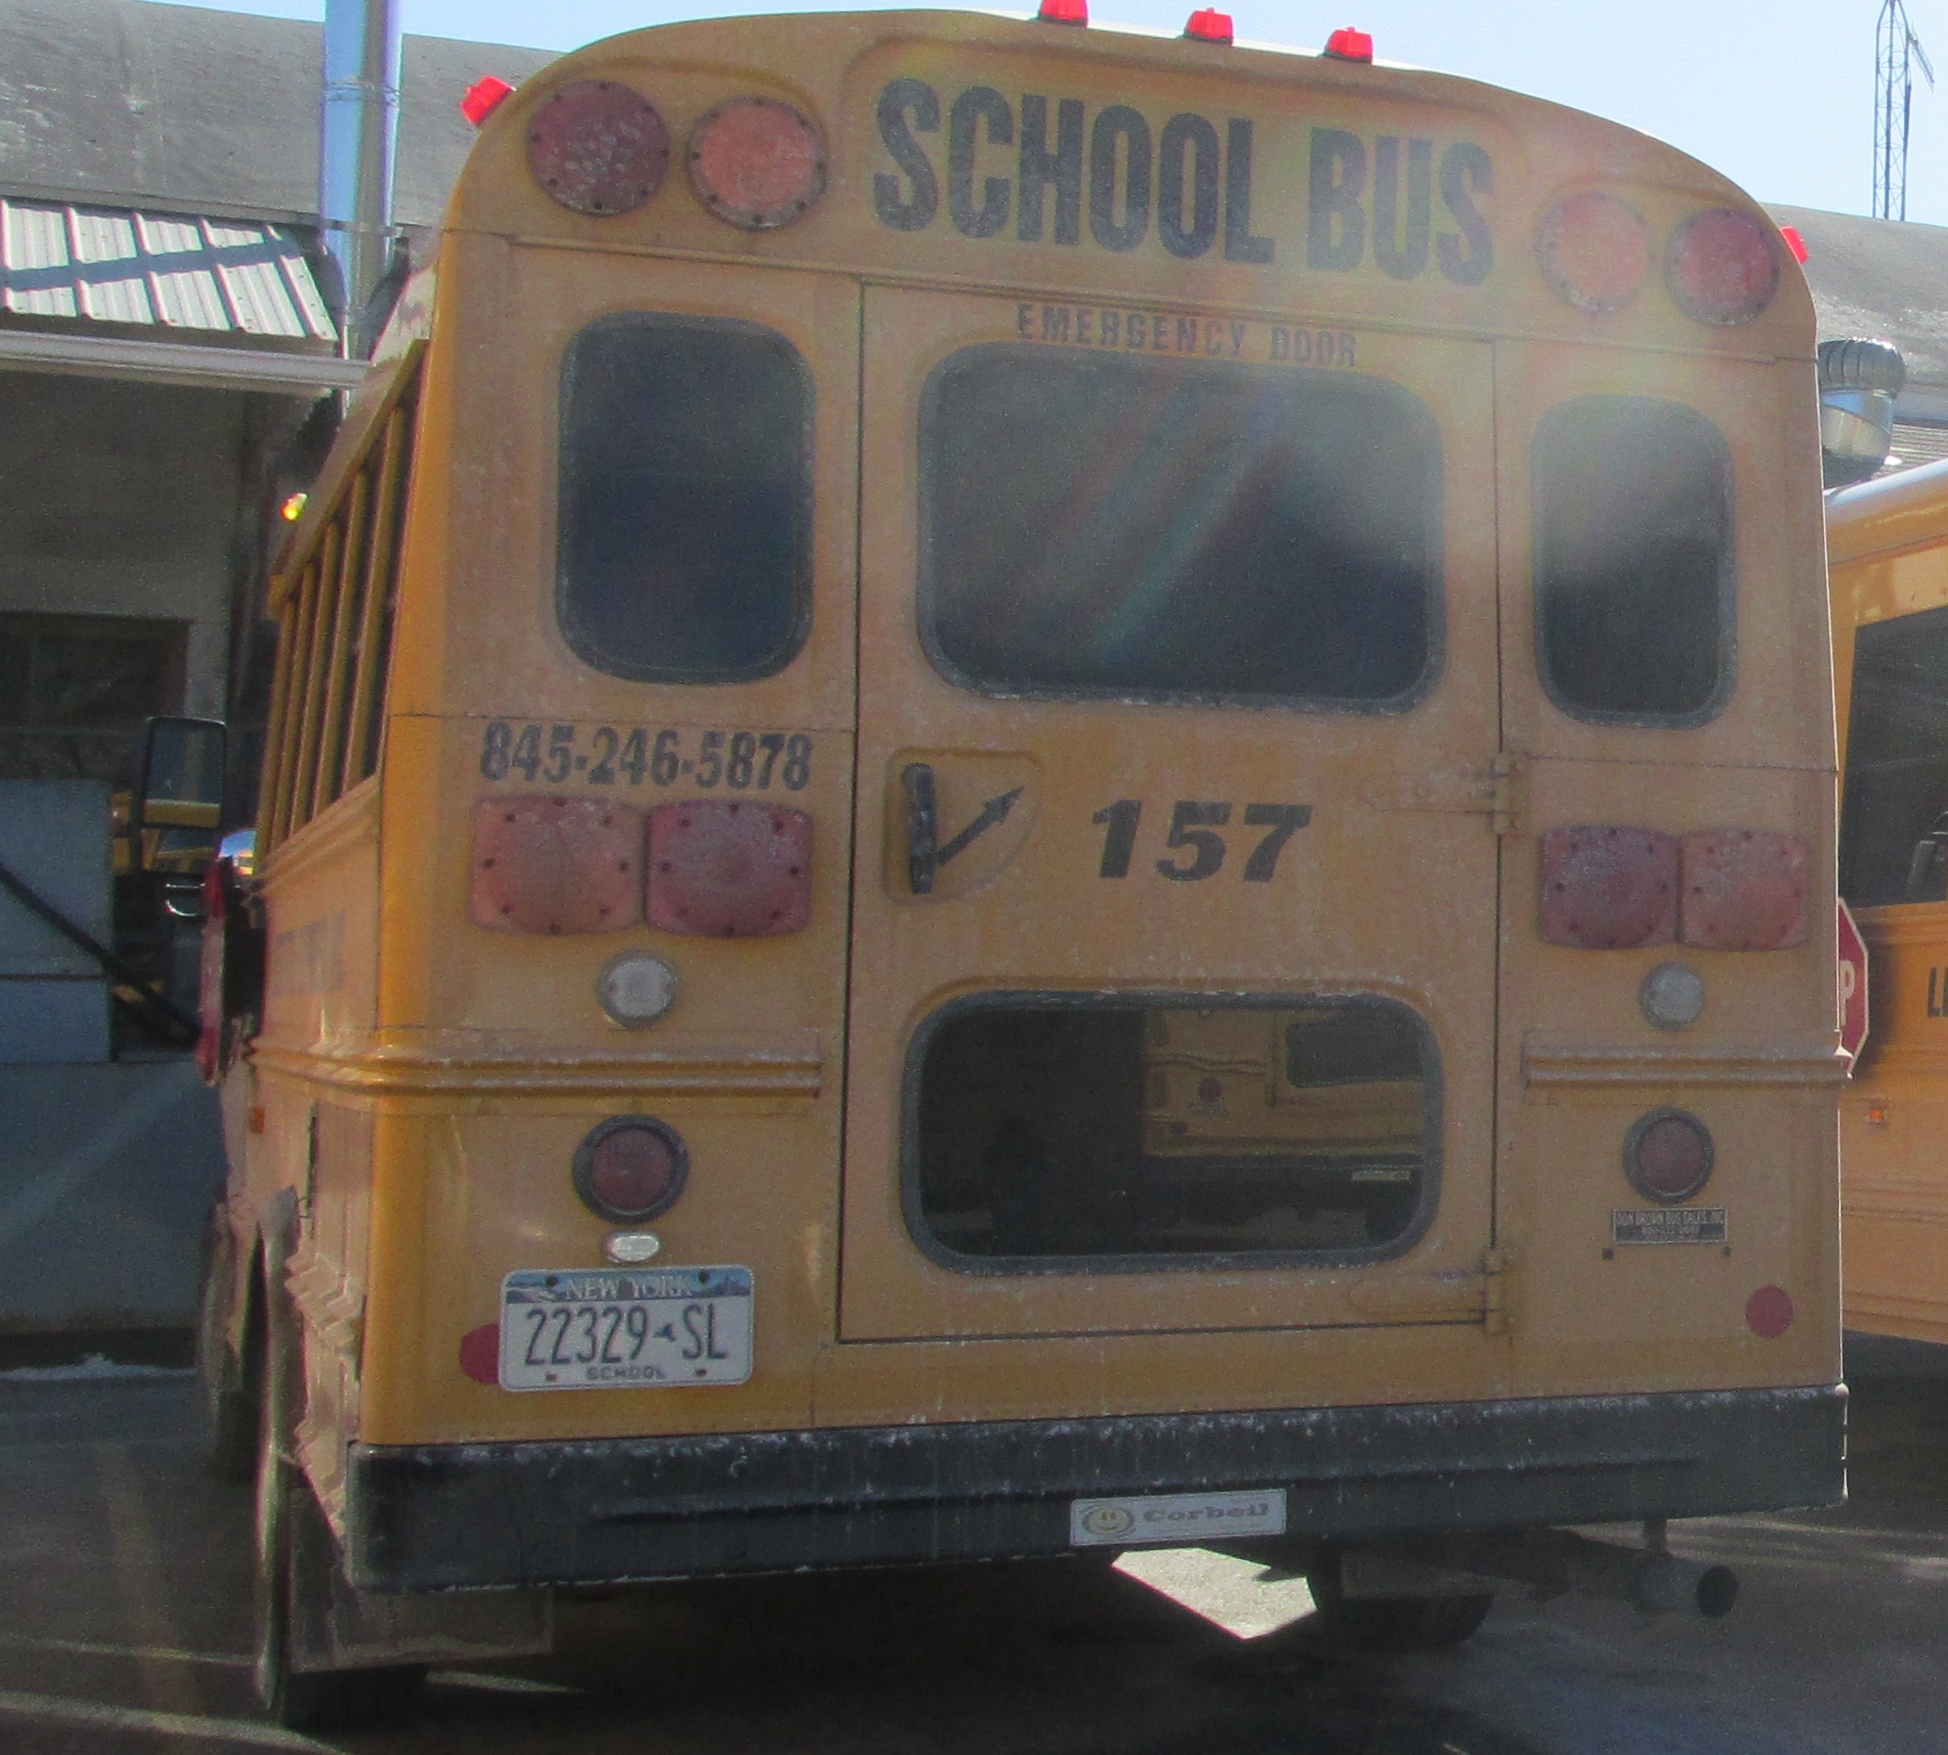 there are many yellow school buses parked together